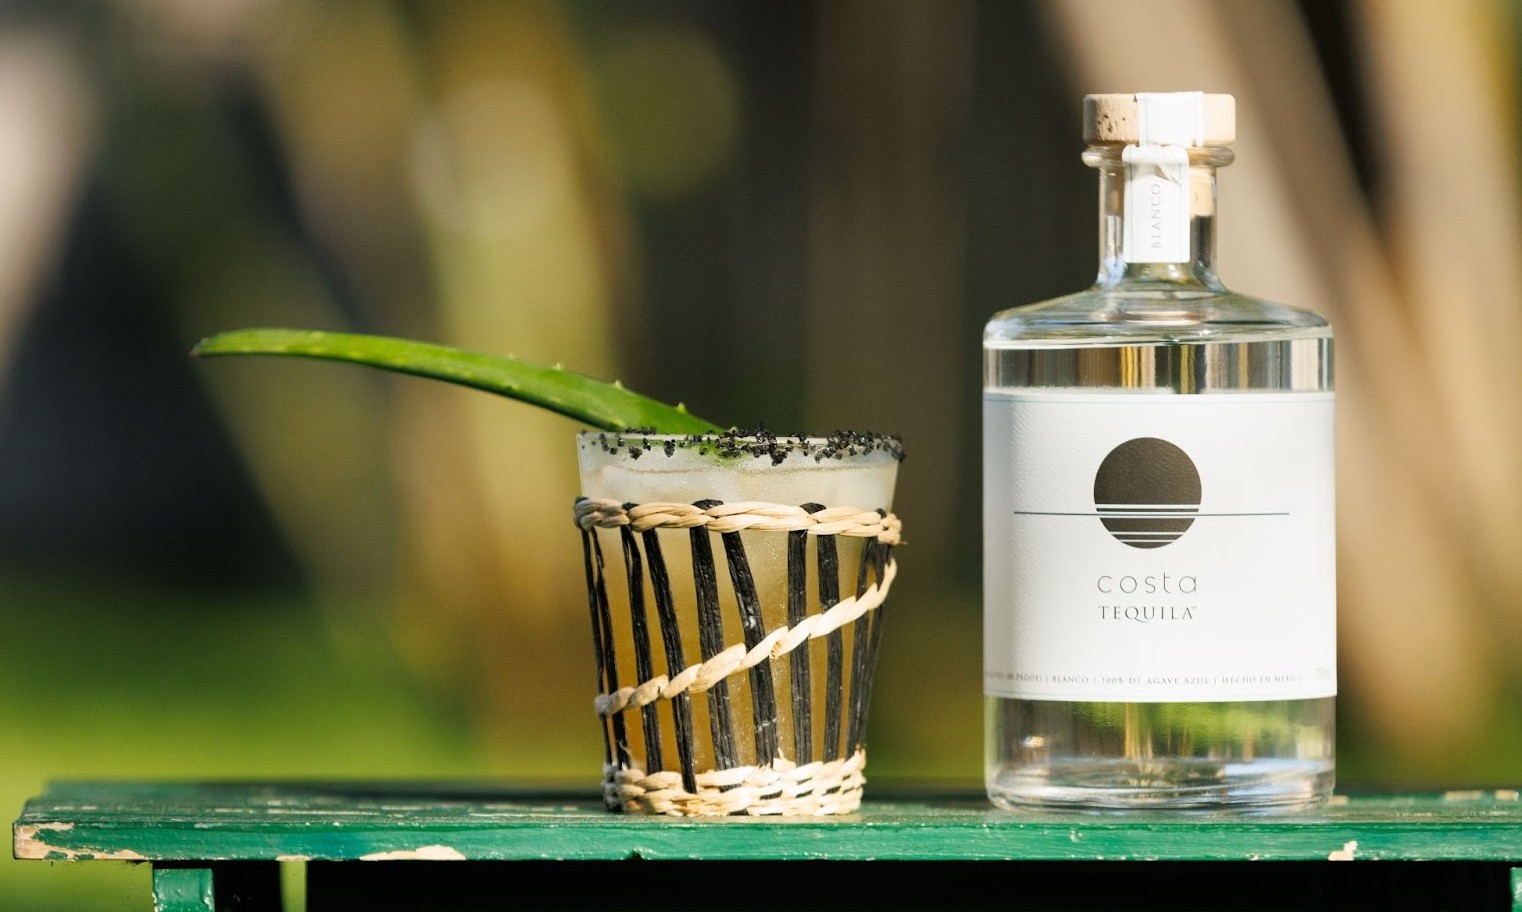 Cinco de Mayo: Celebrate the Tequila Holiday With Costa Tequila